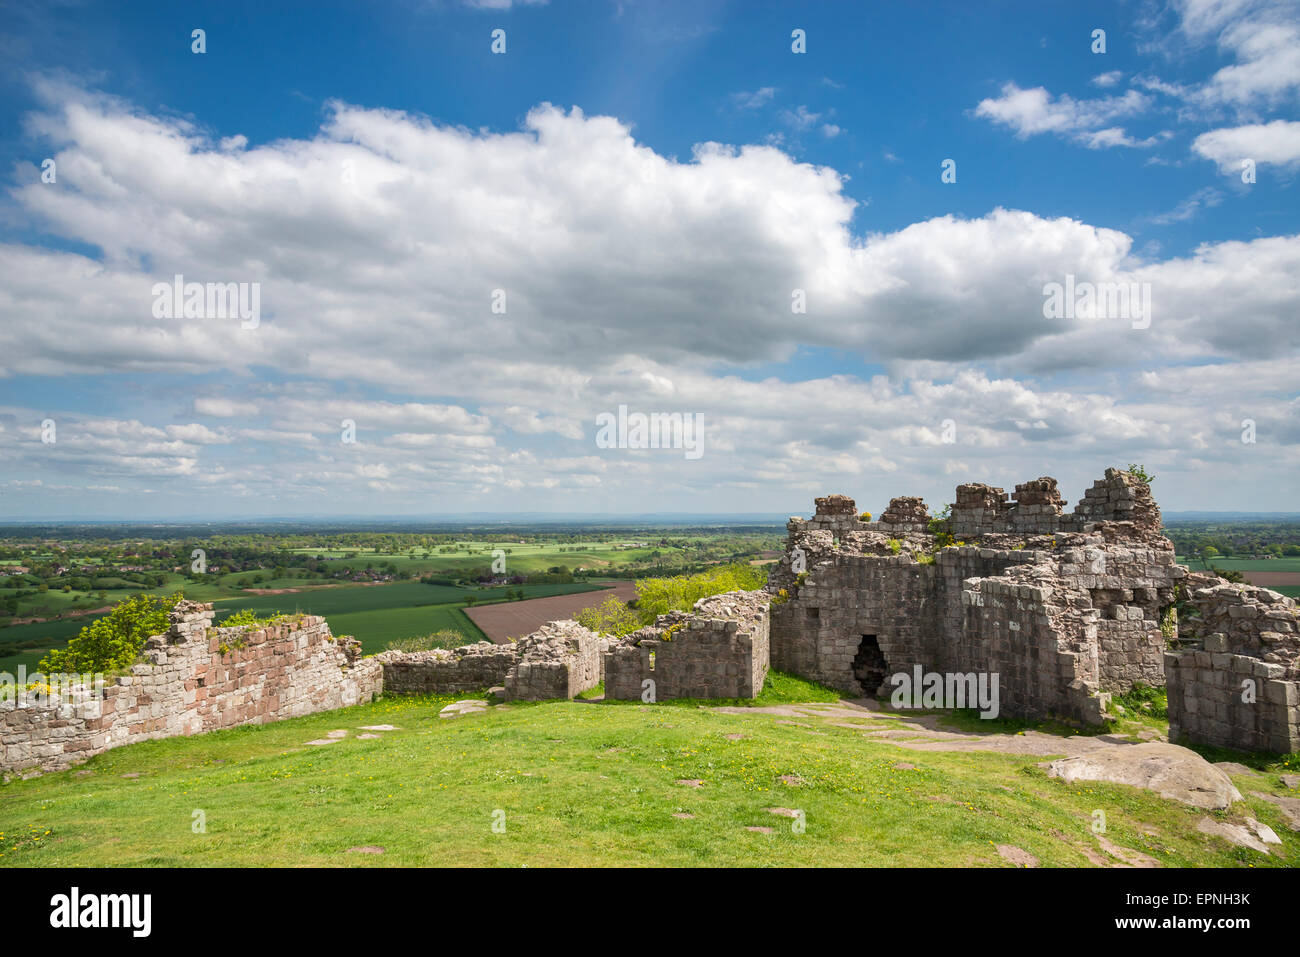 View from the ruin of Beeston castle over the Cheshire plain in England. A sunny spring day. Stock Photo